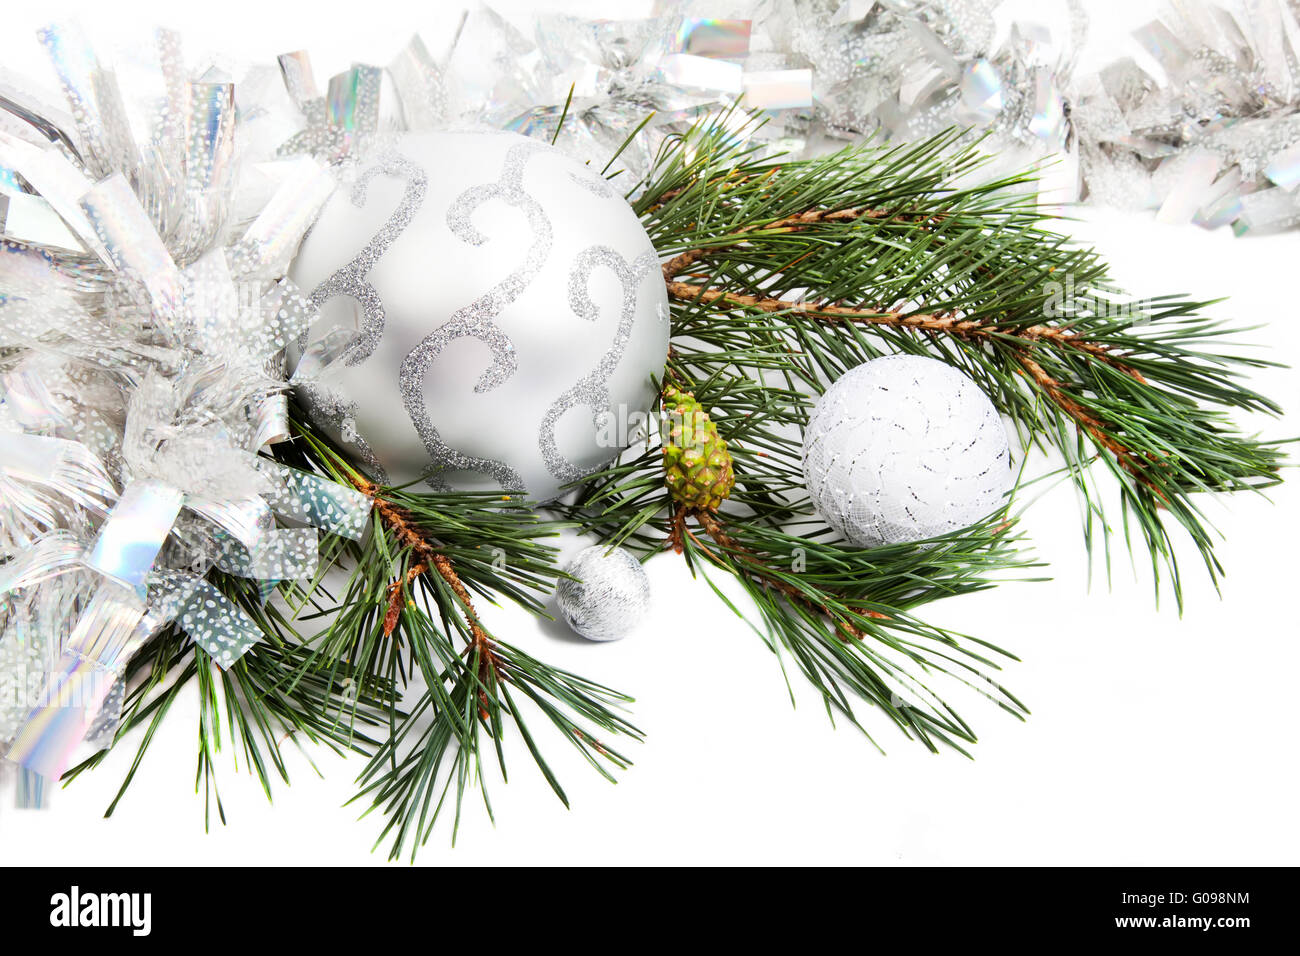 New Year composition with fir branch, tinsel and balls Stock Photo